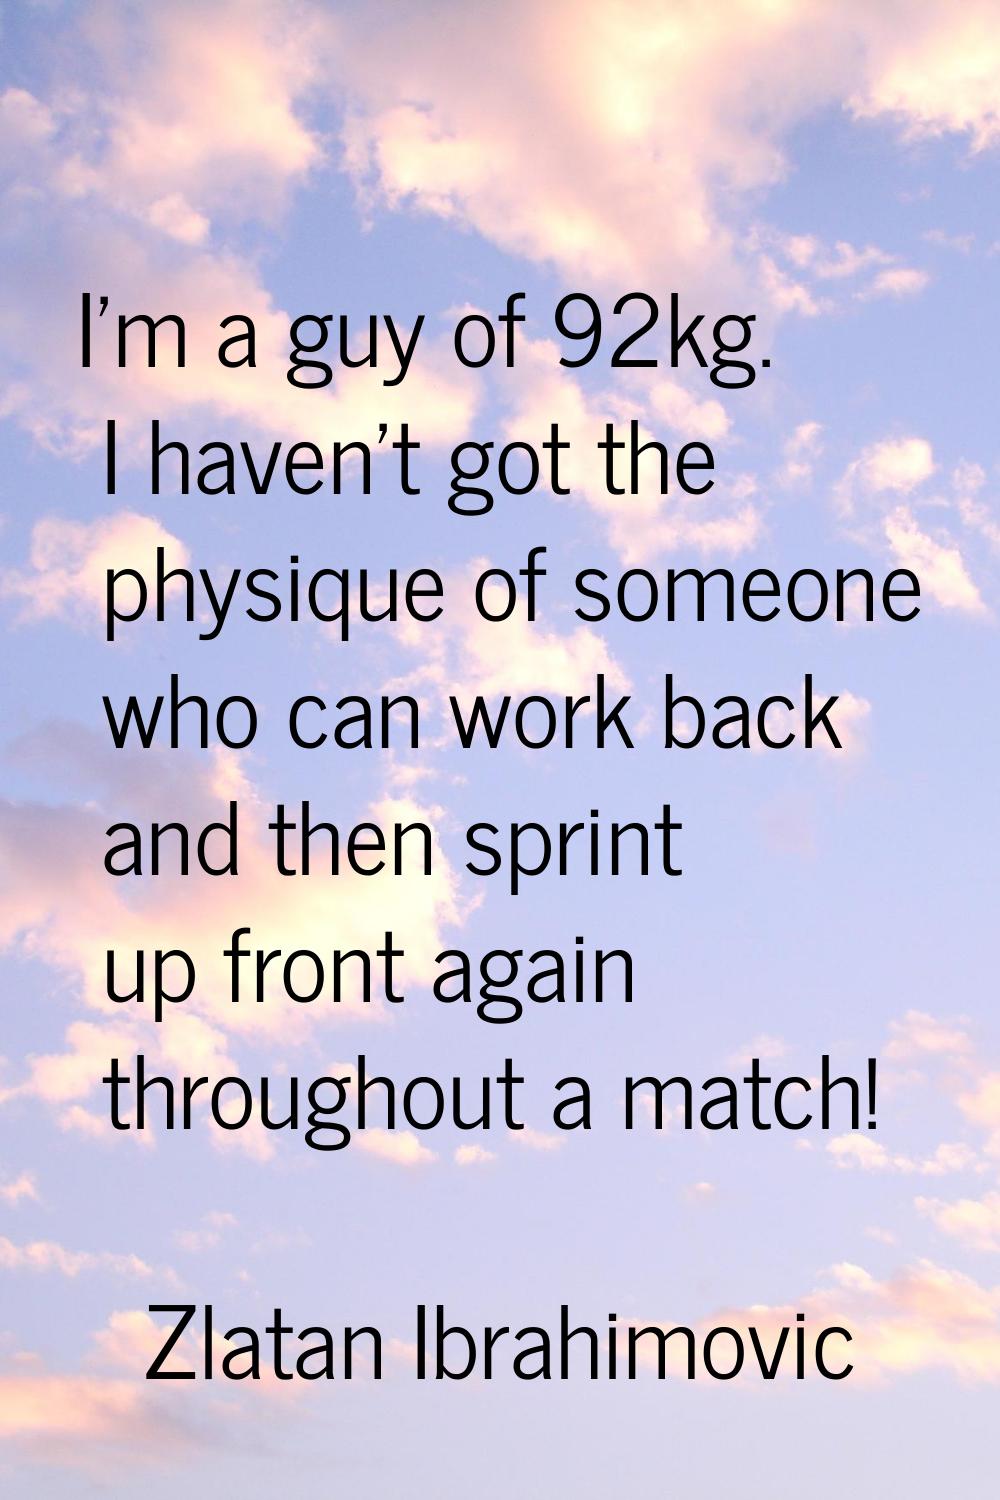 I'm a guy of 92kg. I haven't got the physique of someone who can work back and then sprint up front